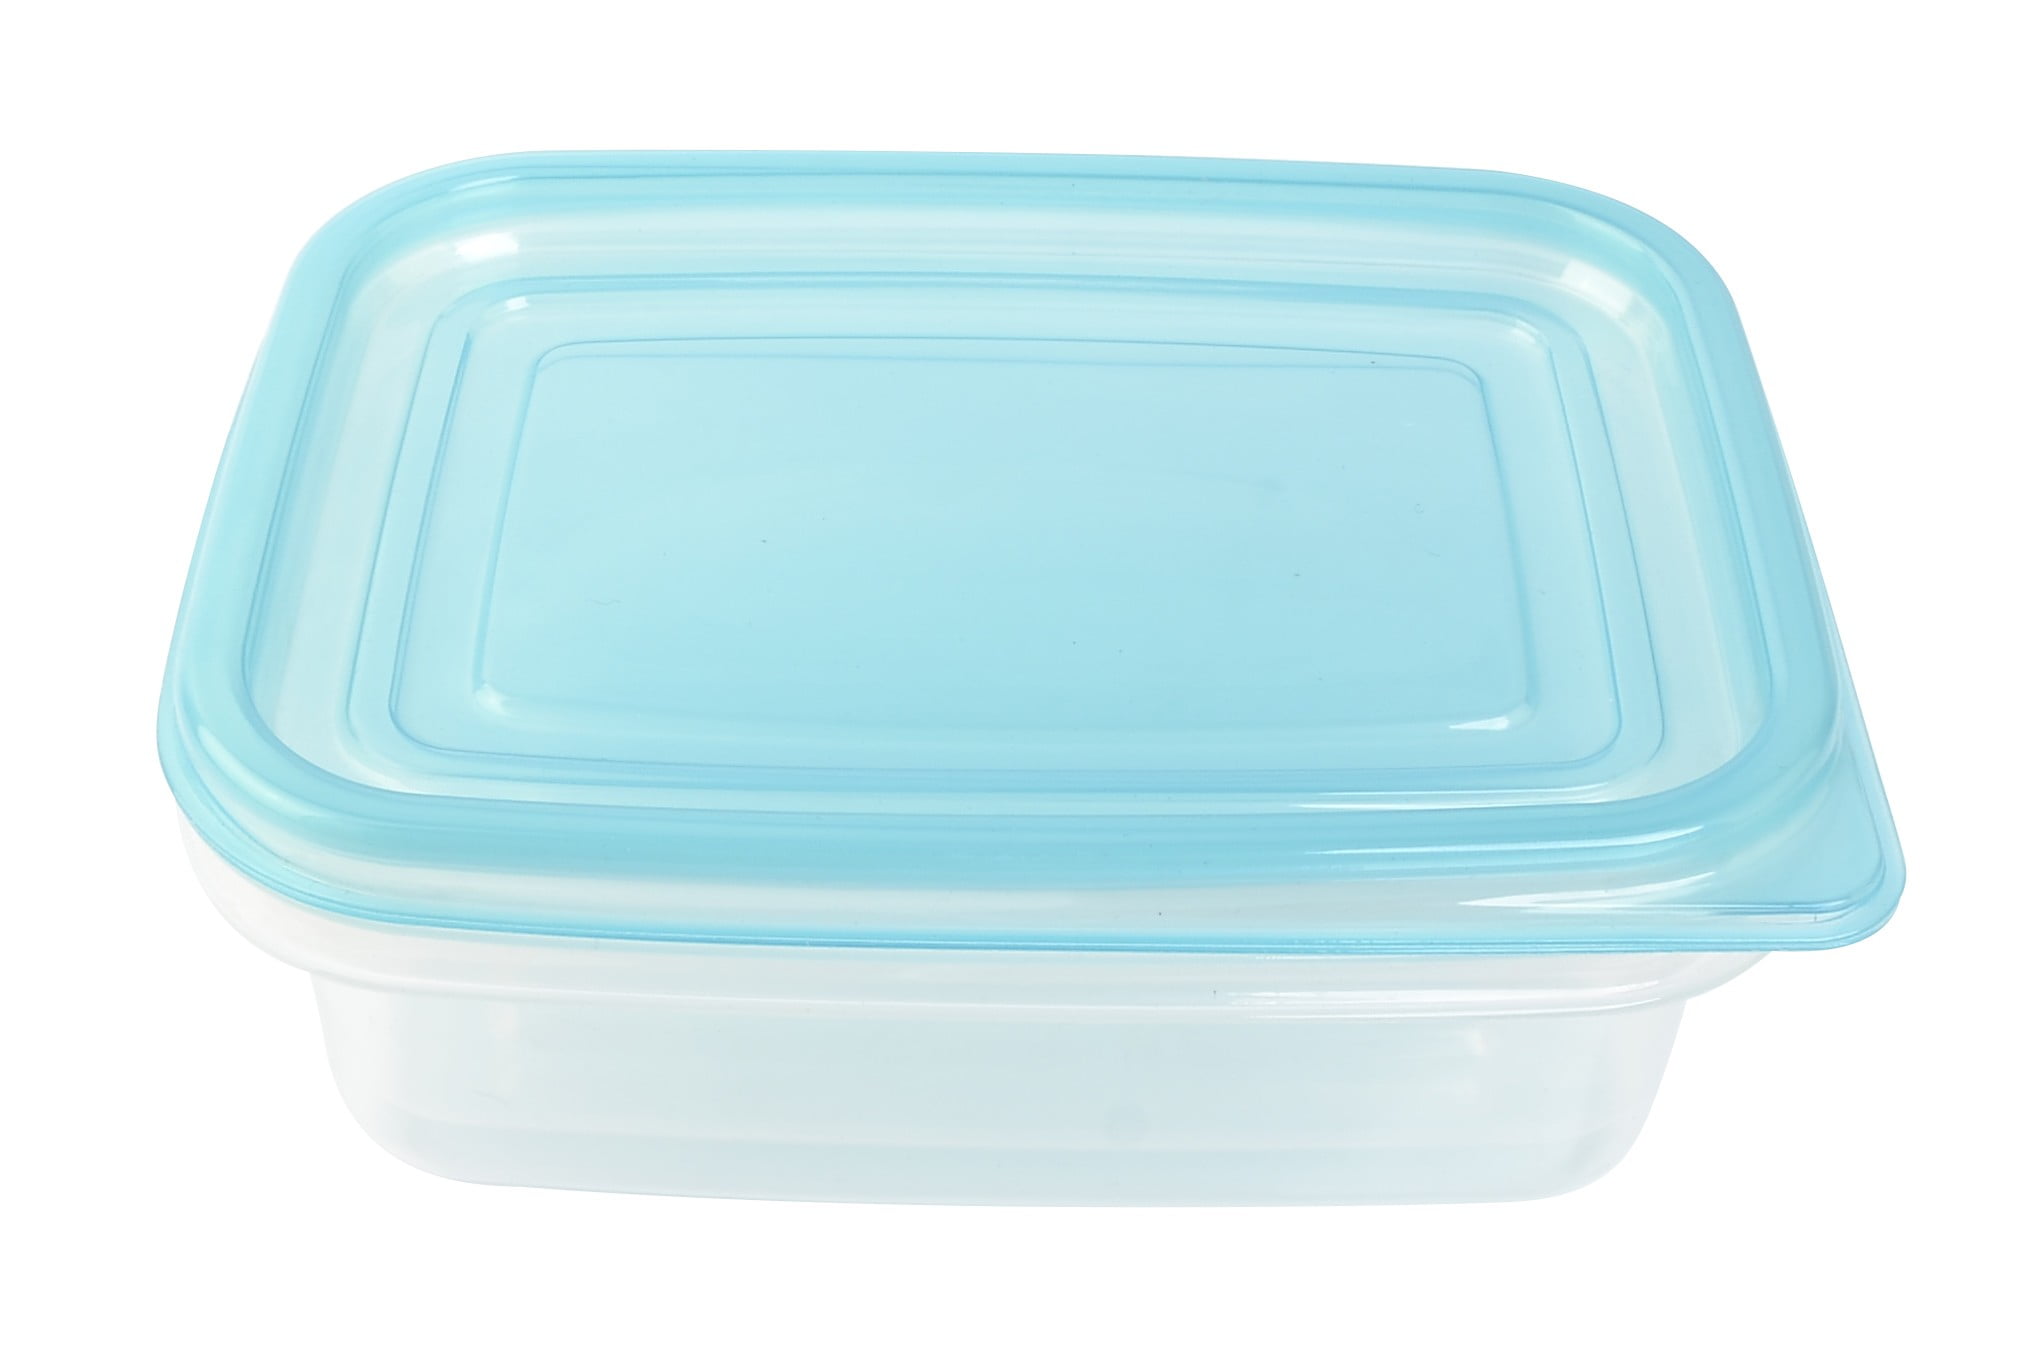 6pc (set of 3) Plastic Rectangle Food Storage Container Set Clear - Figmint™